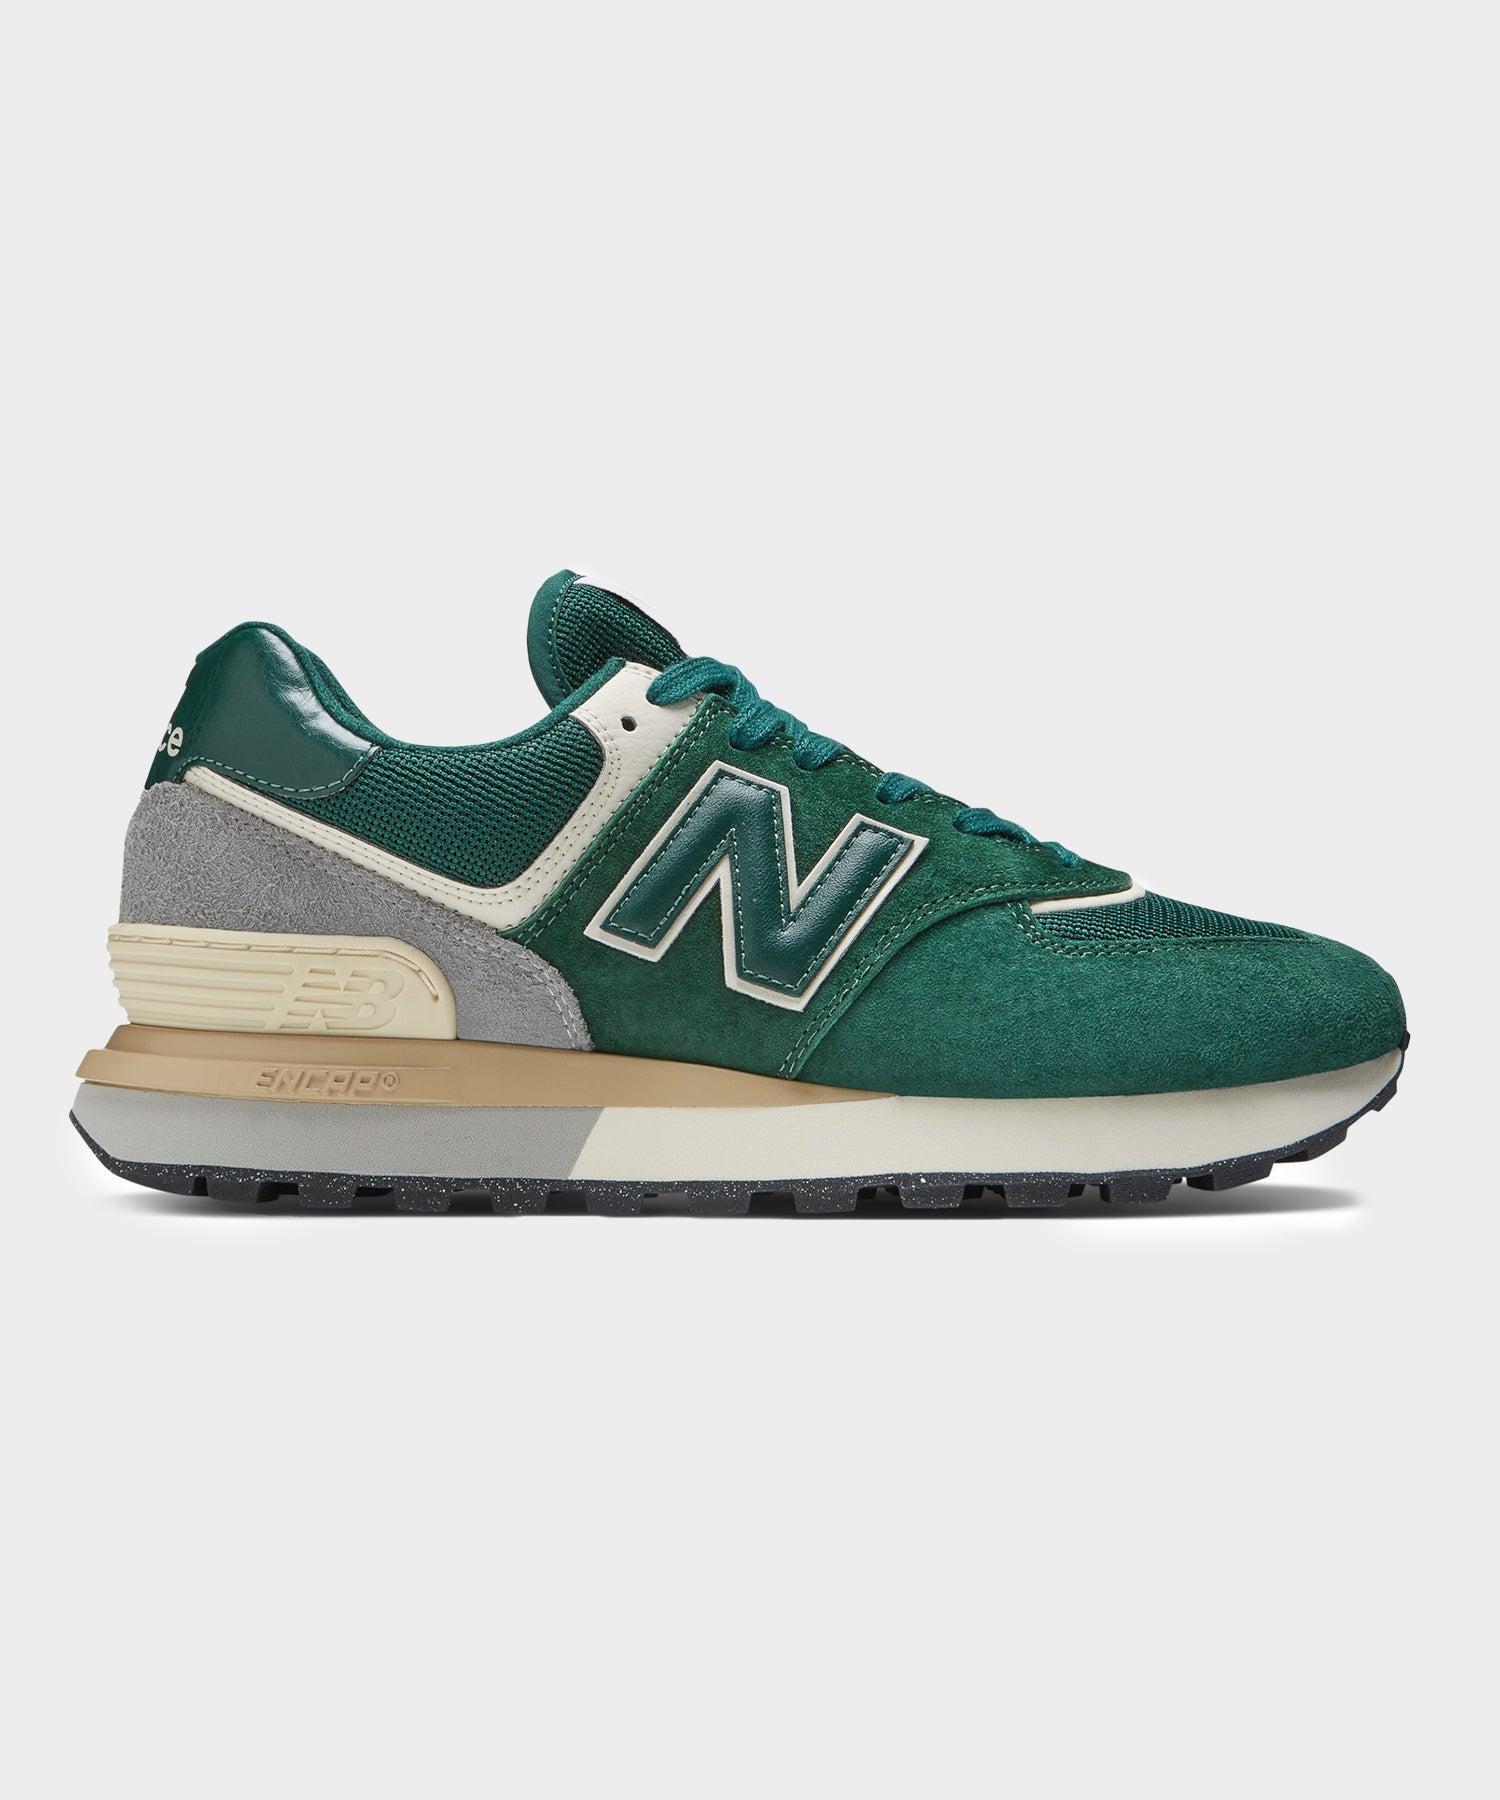 New Balance 574 Legacy "green Silver" Sneakers | Lyst